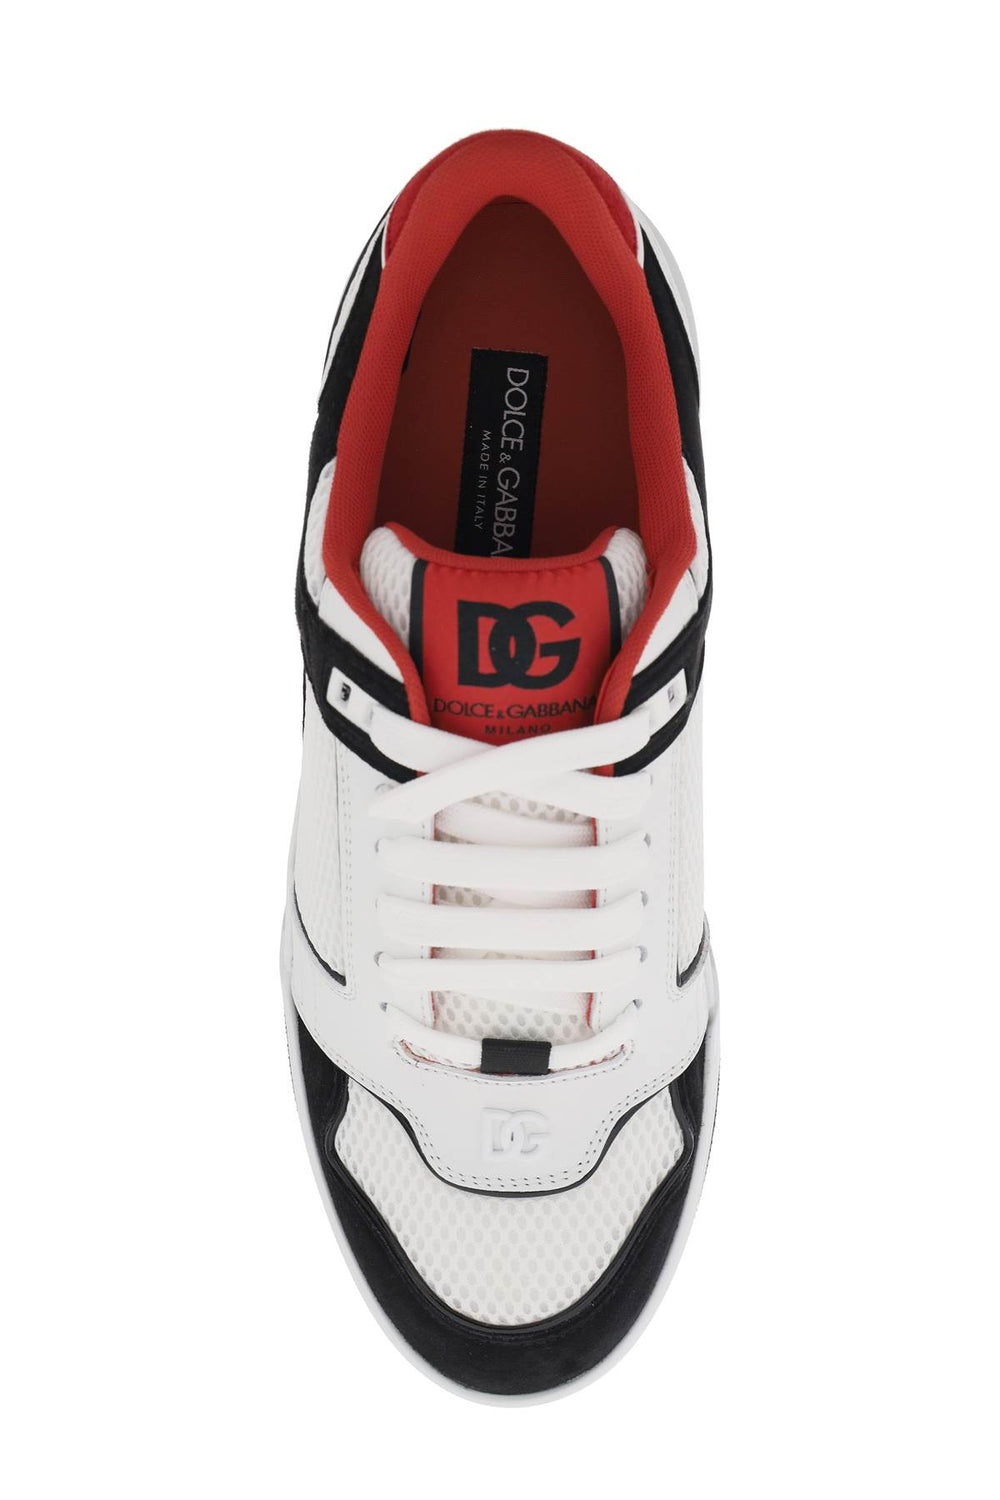 Dolce & gabbana new roma sneakers-1